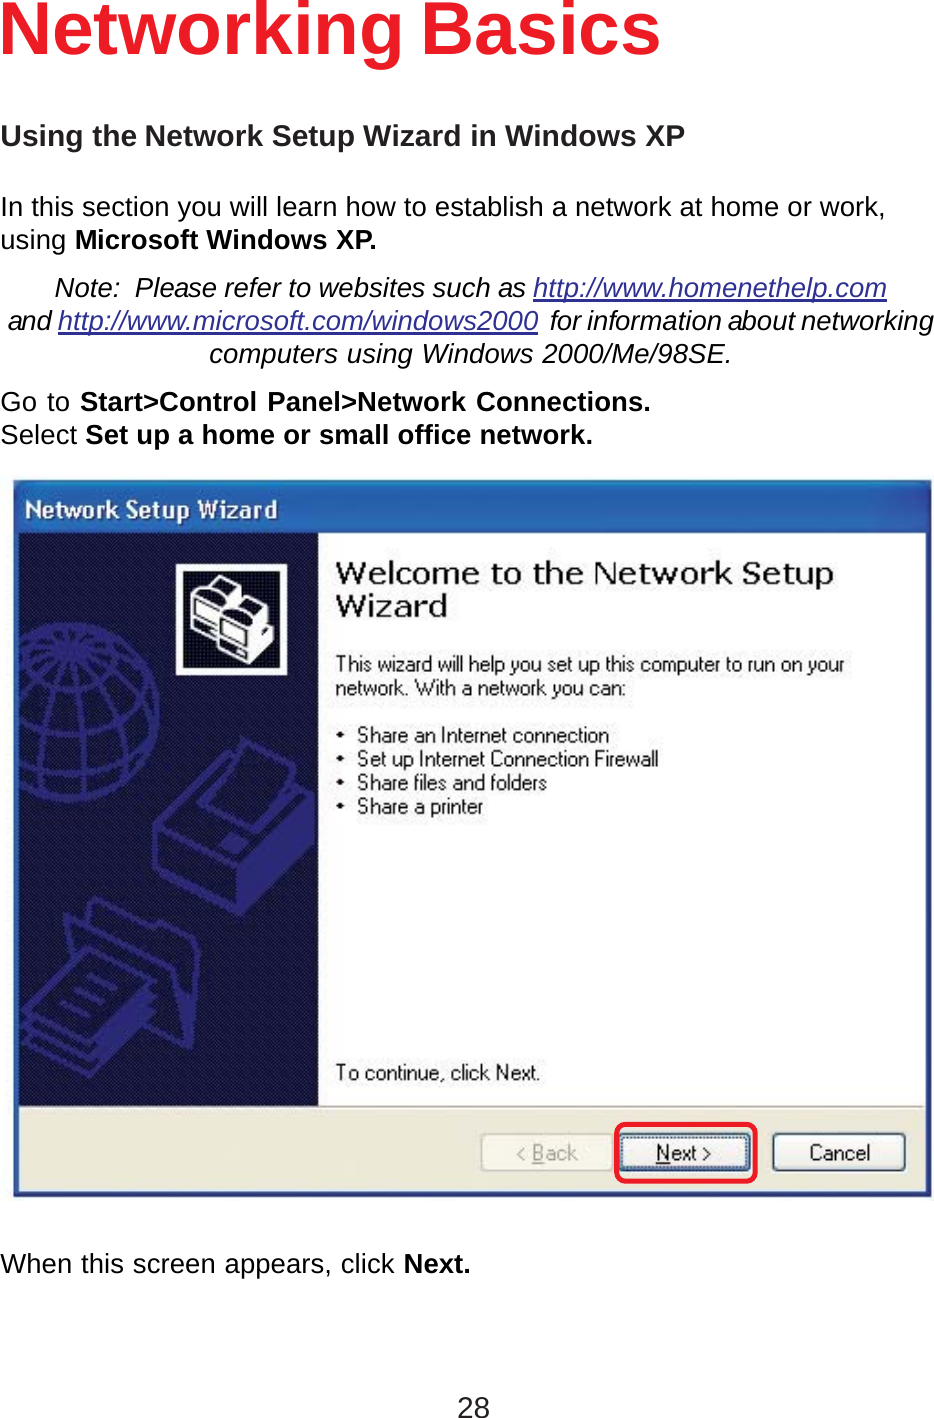 28Using the Network Setup Wizard in Windows XPIn this section you will learn how to establish a network at home or work,using Microsoft Windows XP.Note:  Please refer to websites such as http://www.homenethelp.comand http://www.microsoft.com/windows2000  for information about networkingcomputers using Windows 2000/Me/98SE.Go to Start&gt;Control Panel&gt;Network Connections.Select Set up a home or small office network.Networking BasicsWhen this screen appears, click Next.